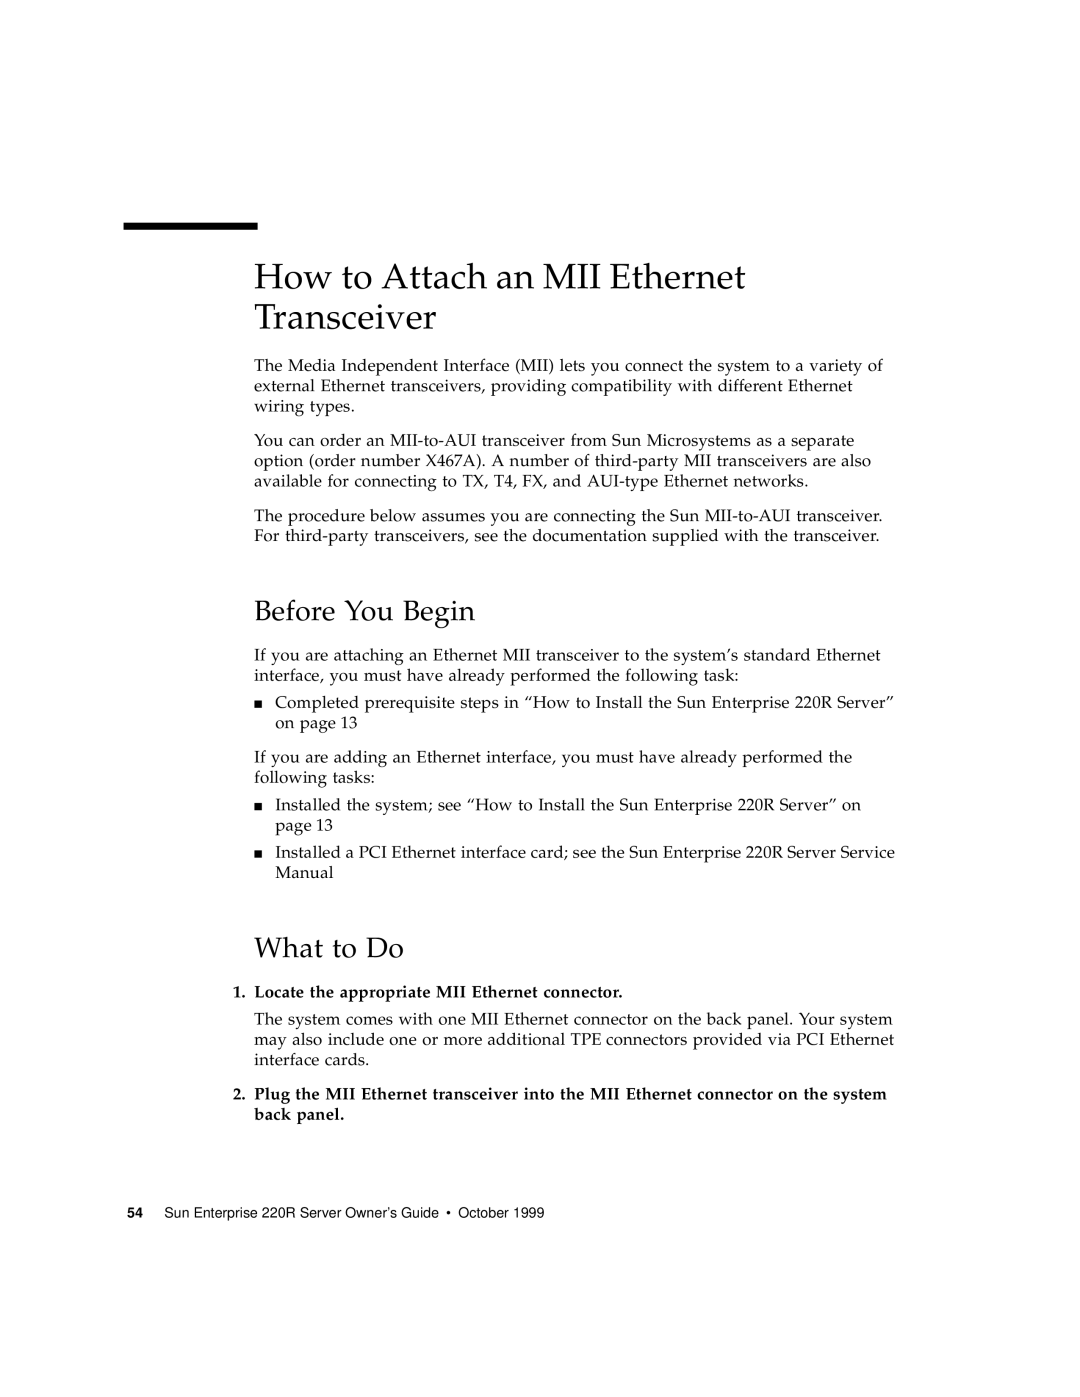 Sun Microsystems 220R How to Attach an MII Ethernet Transceiver, Locate the appropriate MII Ethernet connector, What to Do 